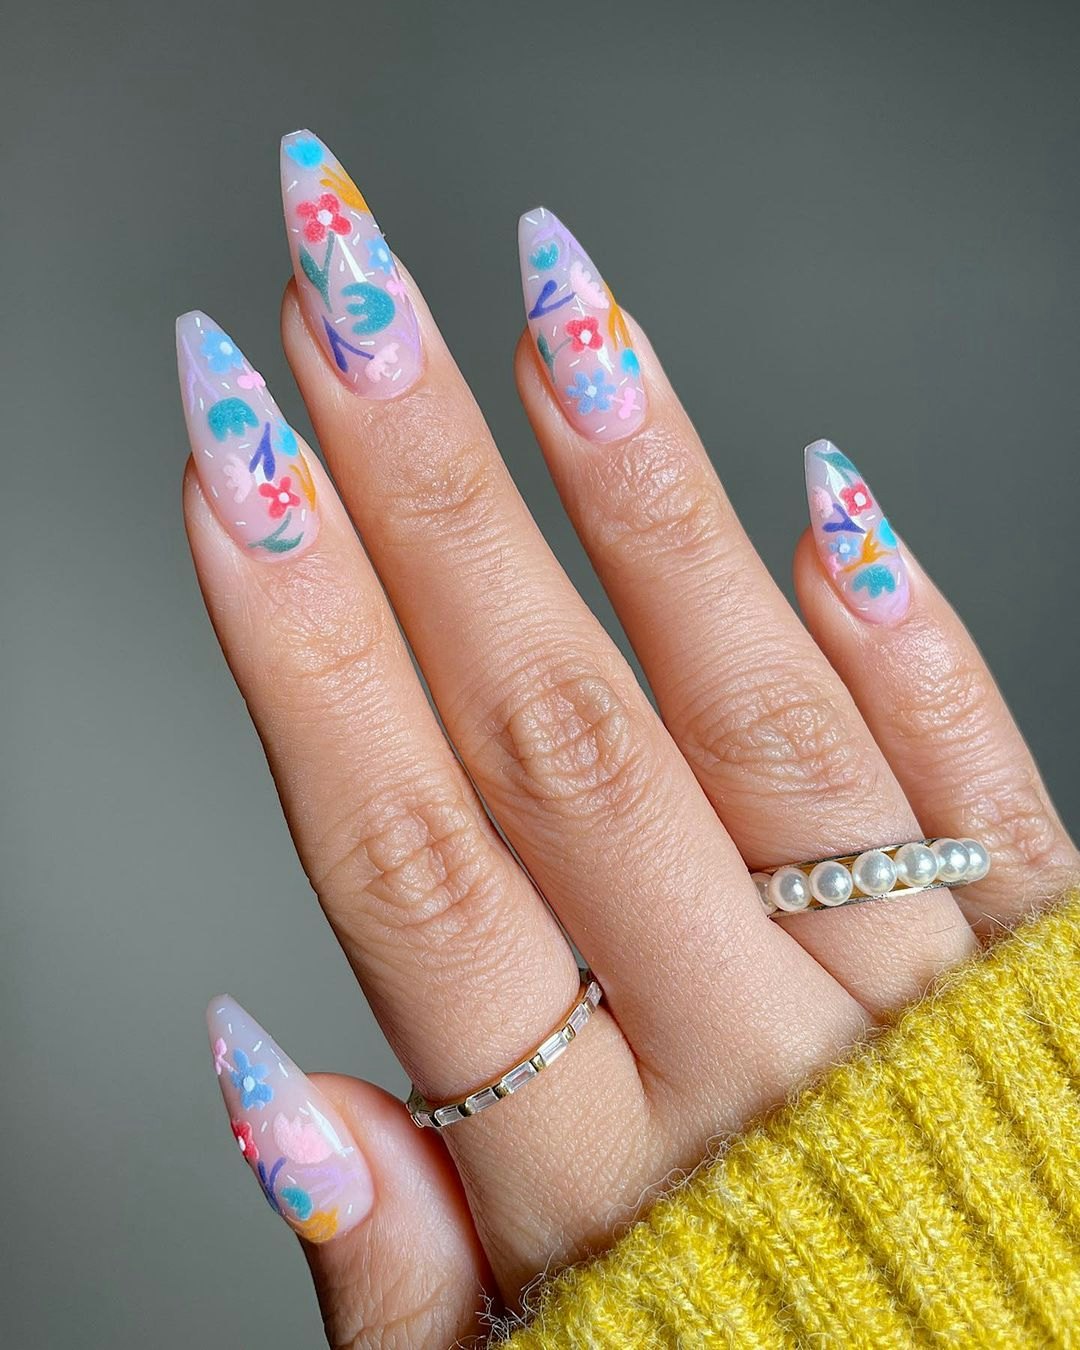 The FLOWER nail art playlist by Robin Moses - YouTube